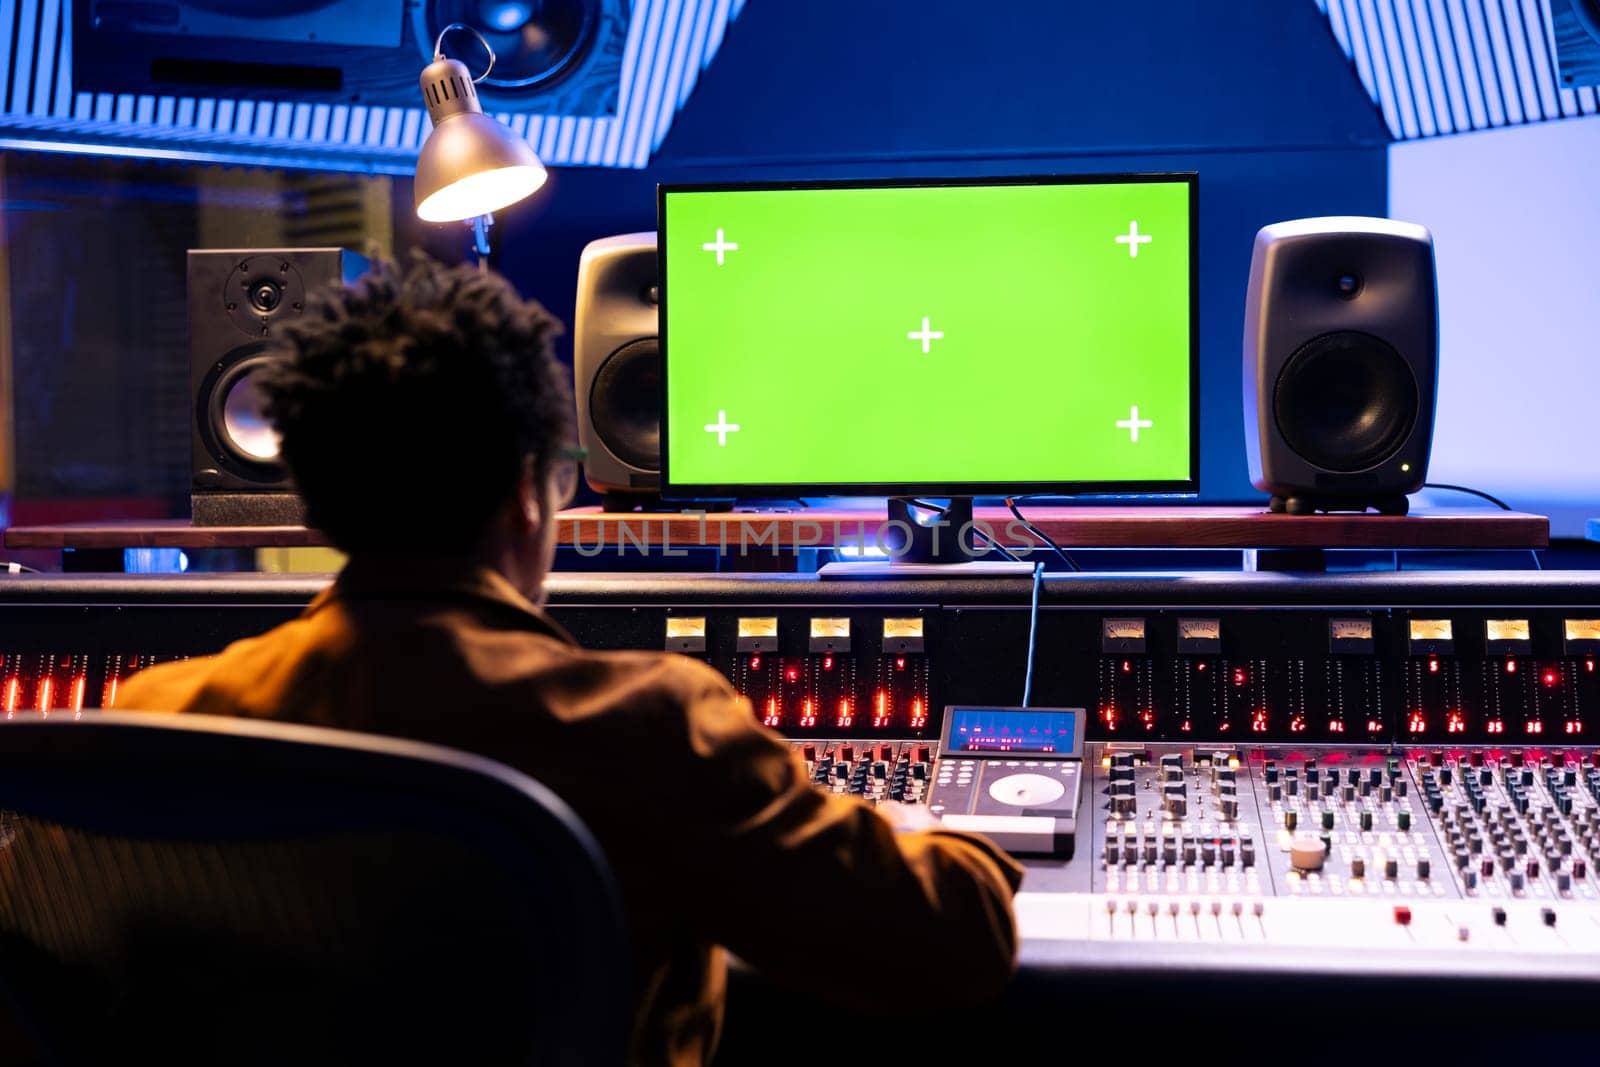 African american sound engineer works with greenscreen on computer in professional recording studio, mixing and mastering sounds on panel board. Young music producer pushing knobs and faders.